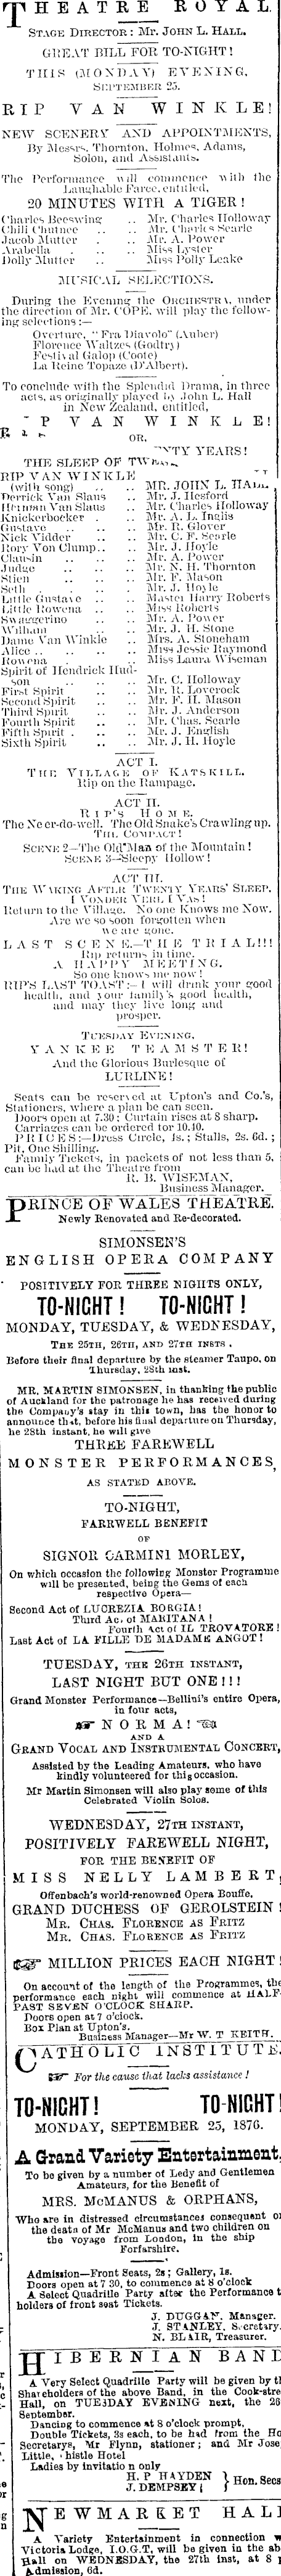 Papers Past Newspapers Auckland Star 25 September 1876 Page 3 Advertisements Column 4